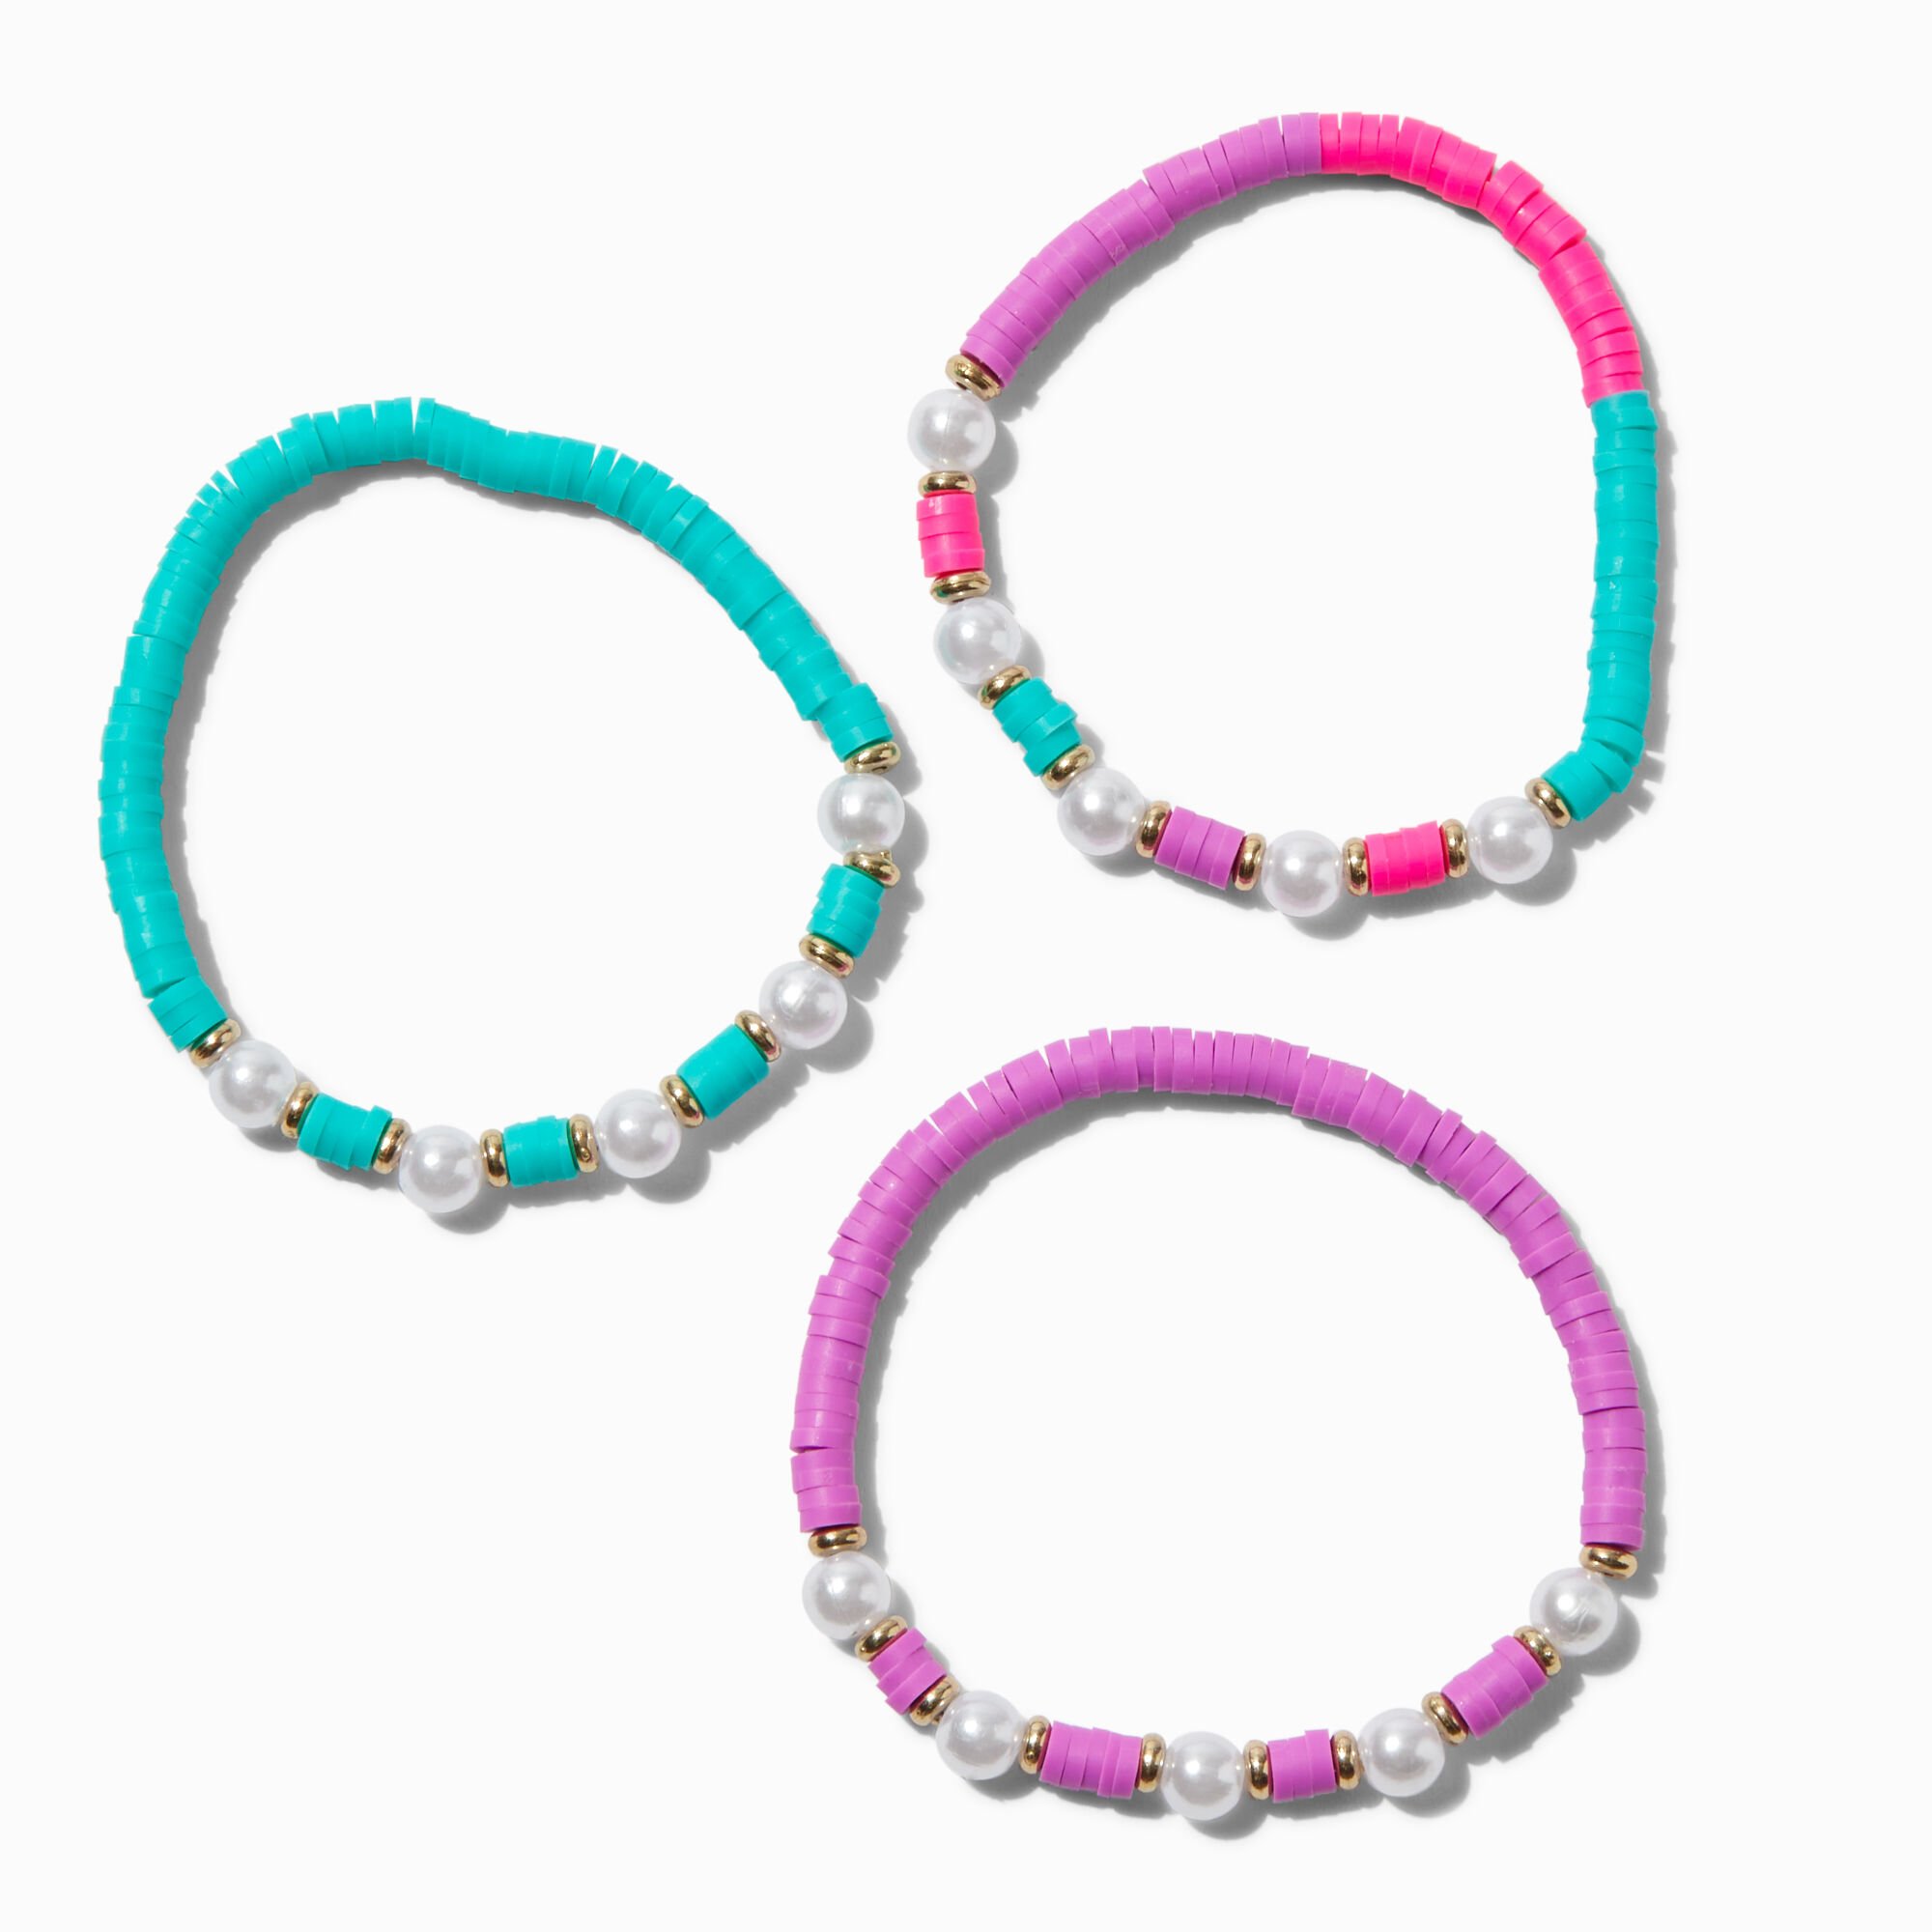 View Claires Club Pearl Jewel Tone Disc Beaded Stretch Bracelets 3 Pack information